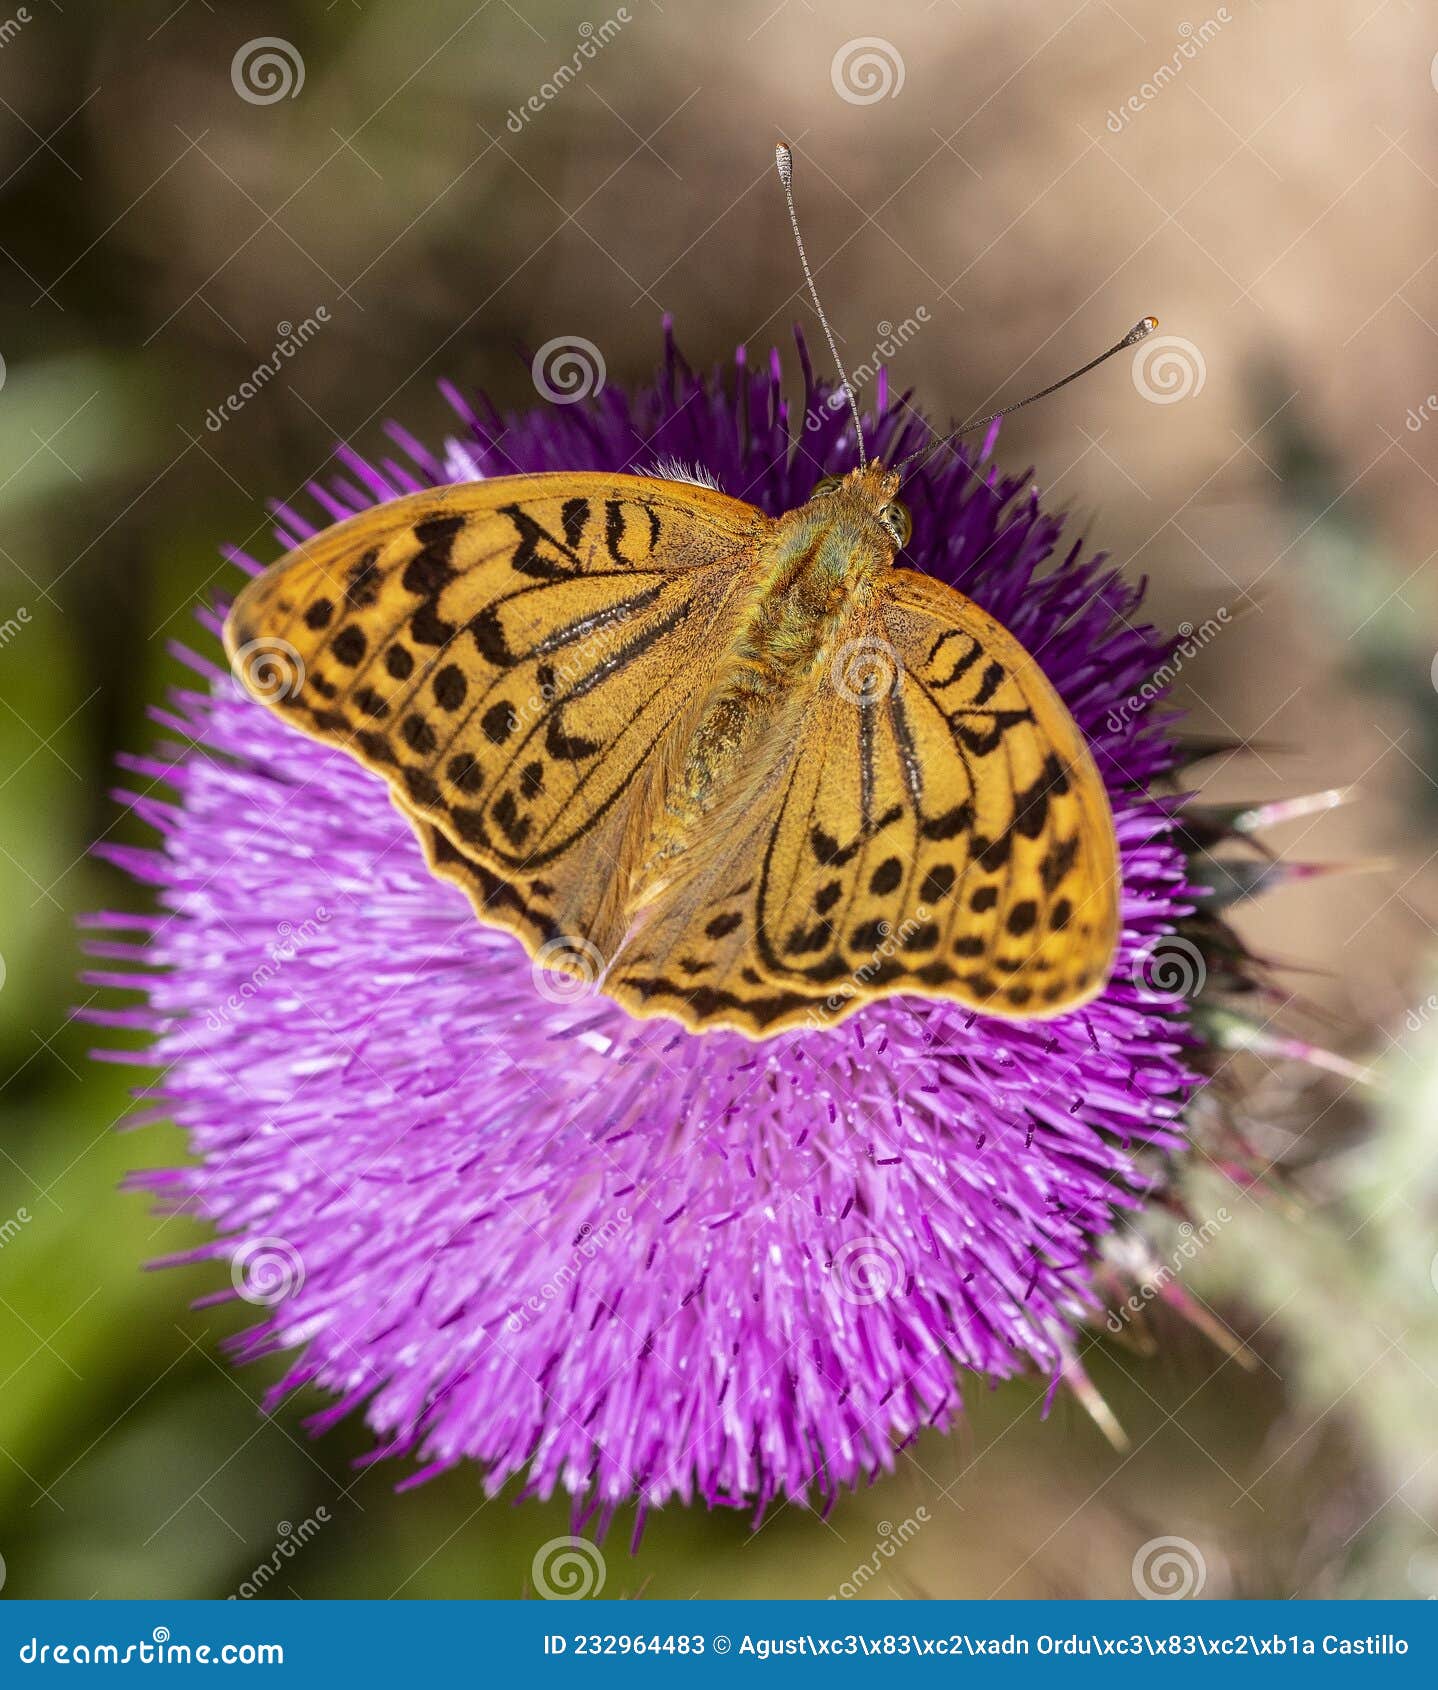 day butterfly perched on flower, argynnis pandora.